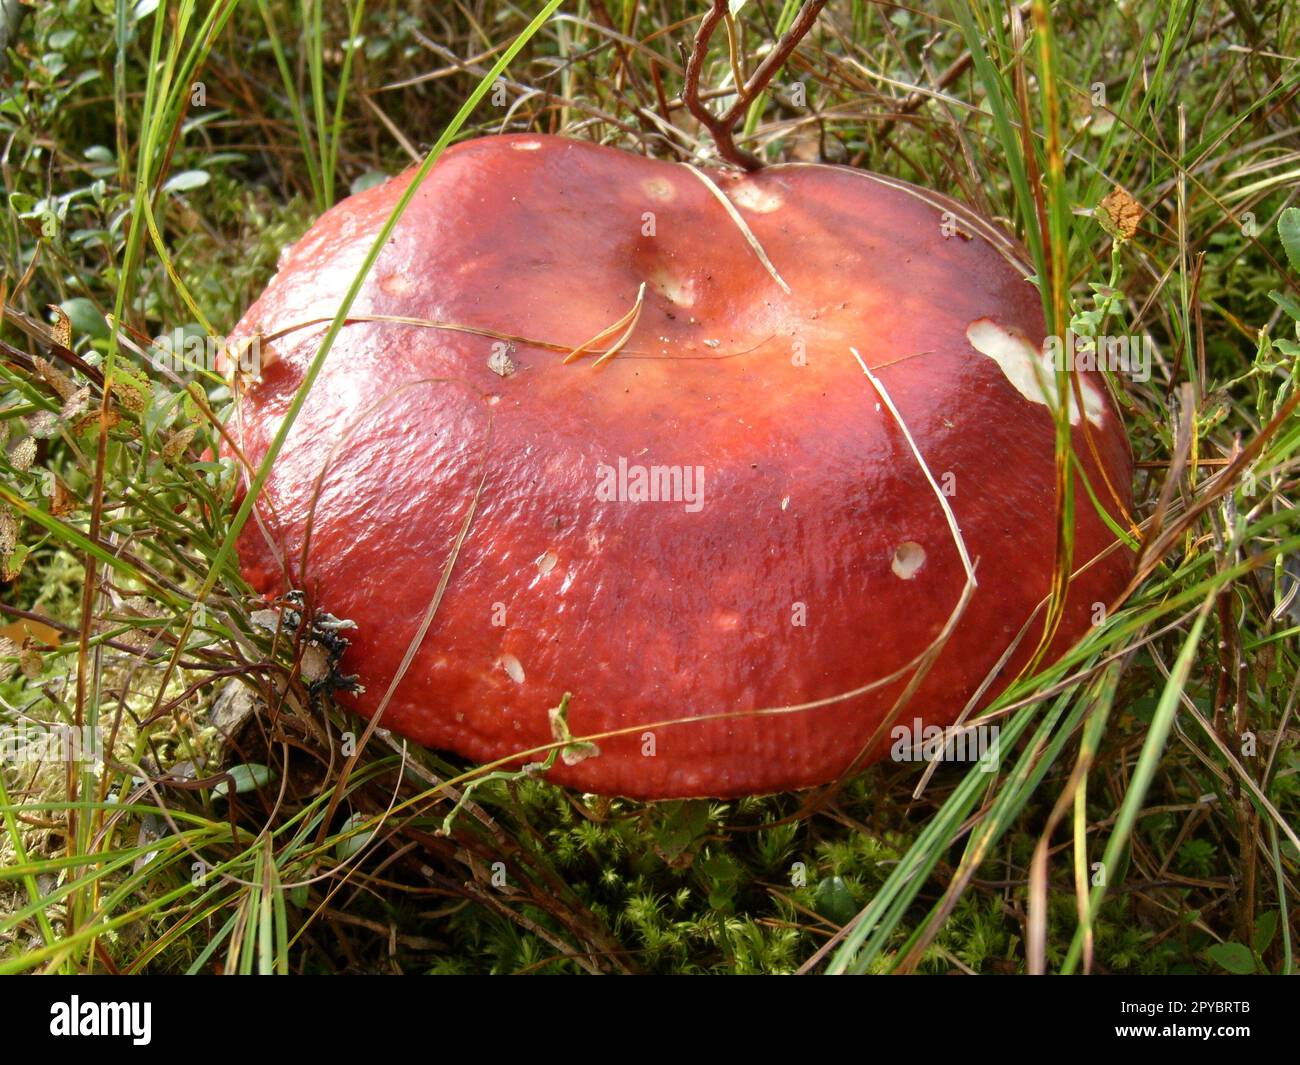 Mushroom with a red hat. A fresh, large russula or boletus found in the forest by a mushroom picker. A good find during a forest walk. A product consumed by a person in food after heat treatment. Stock Photo